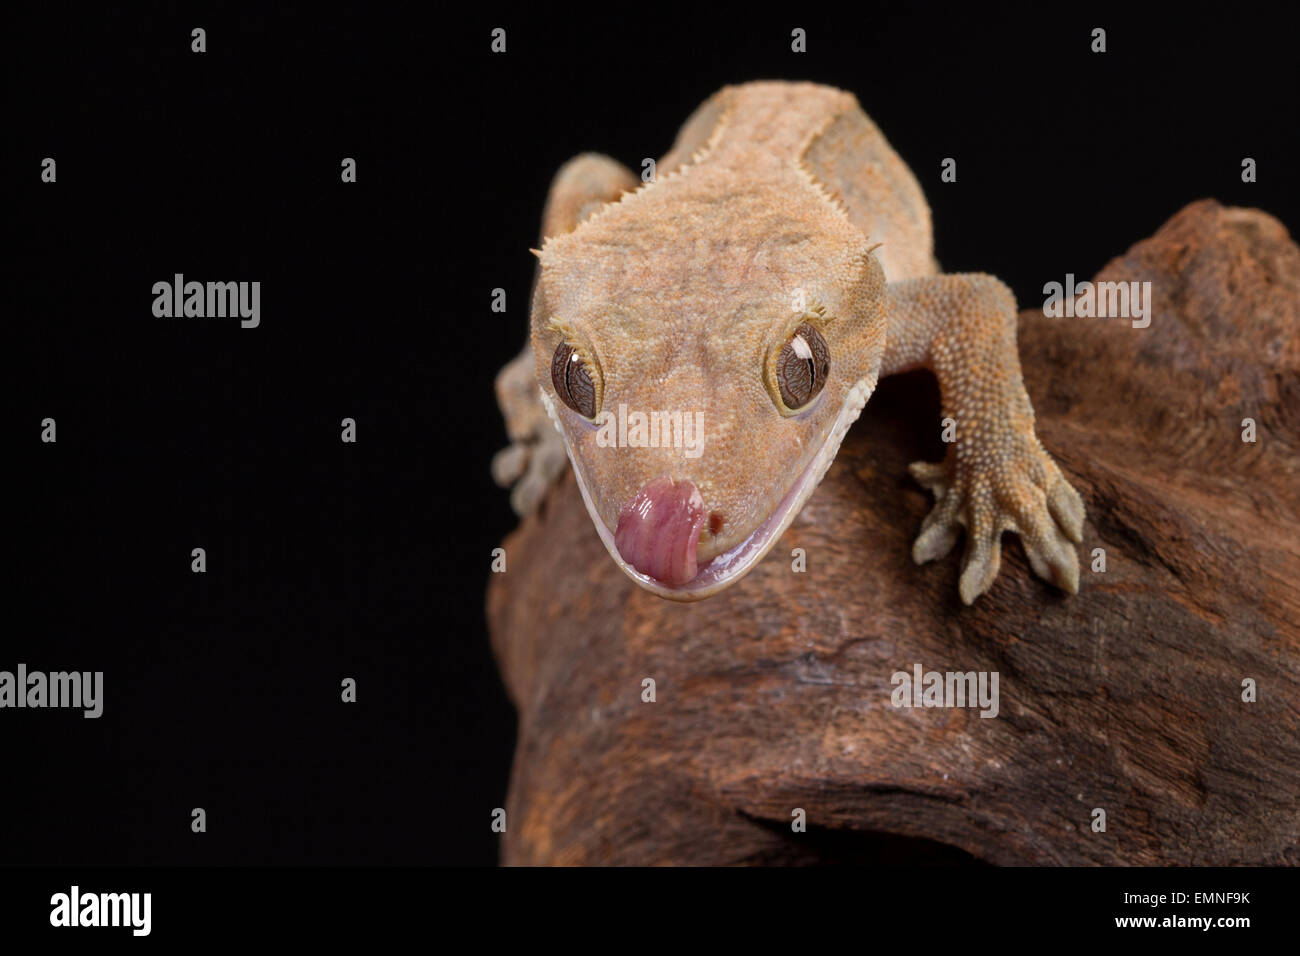 Crested Gecko Stock Photo